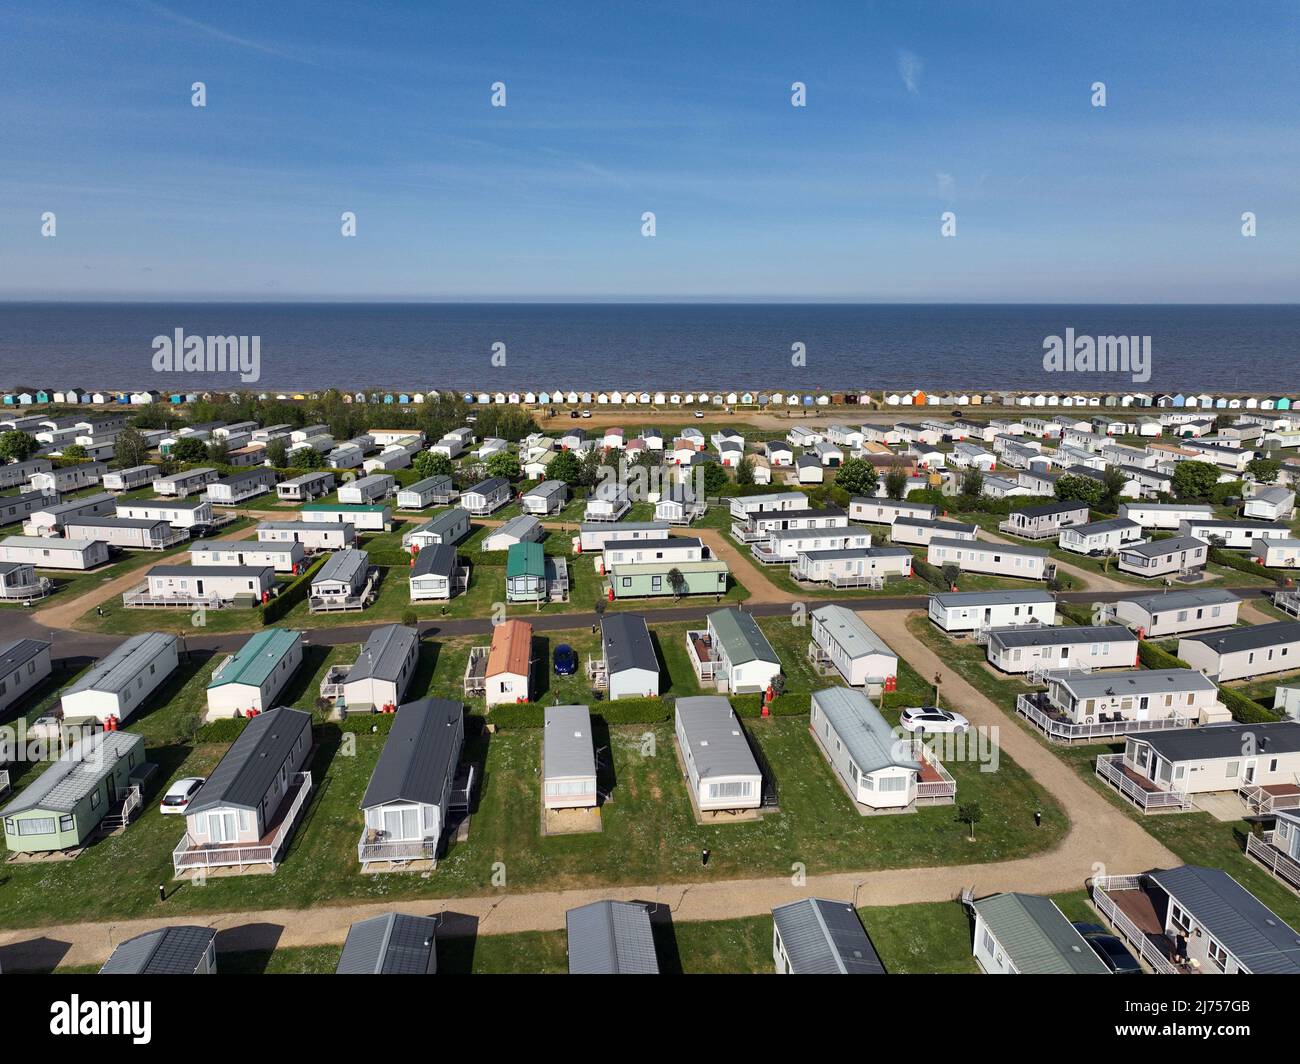 Lovely blue skies over the caravan parks, n a sunny morning in Heacham, Norfolk, UK, on May 5, 2022. Stock Photo